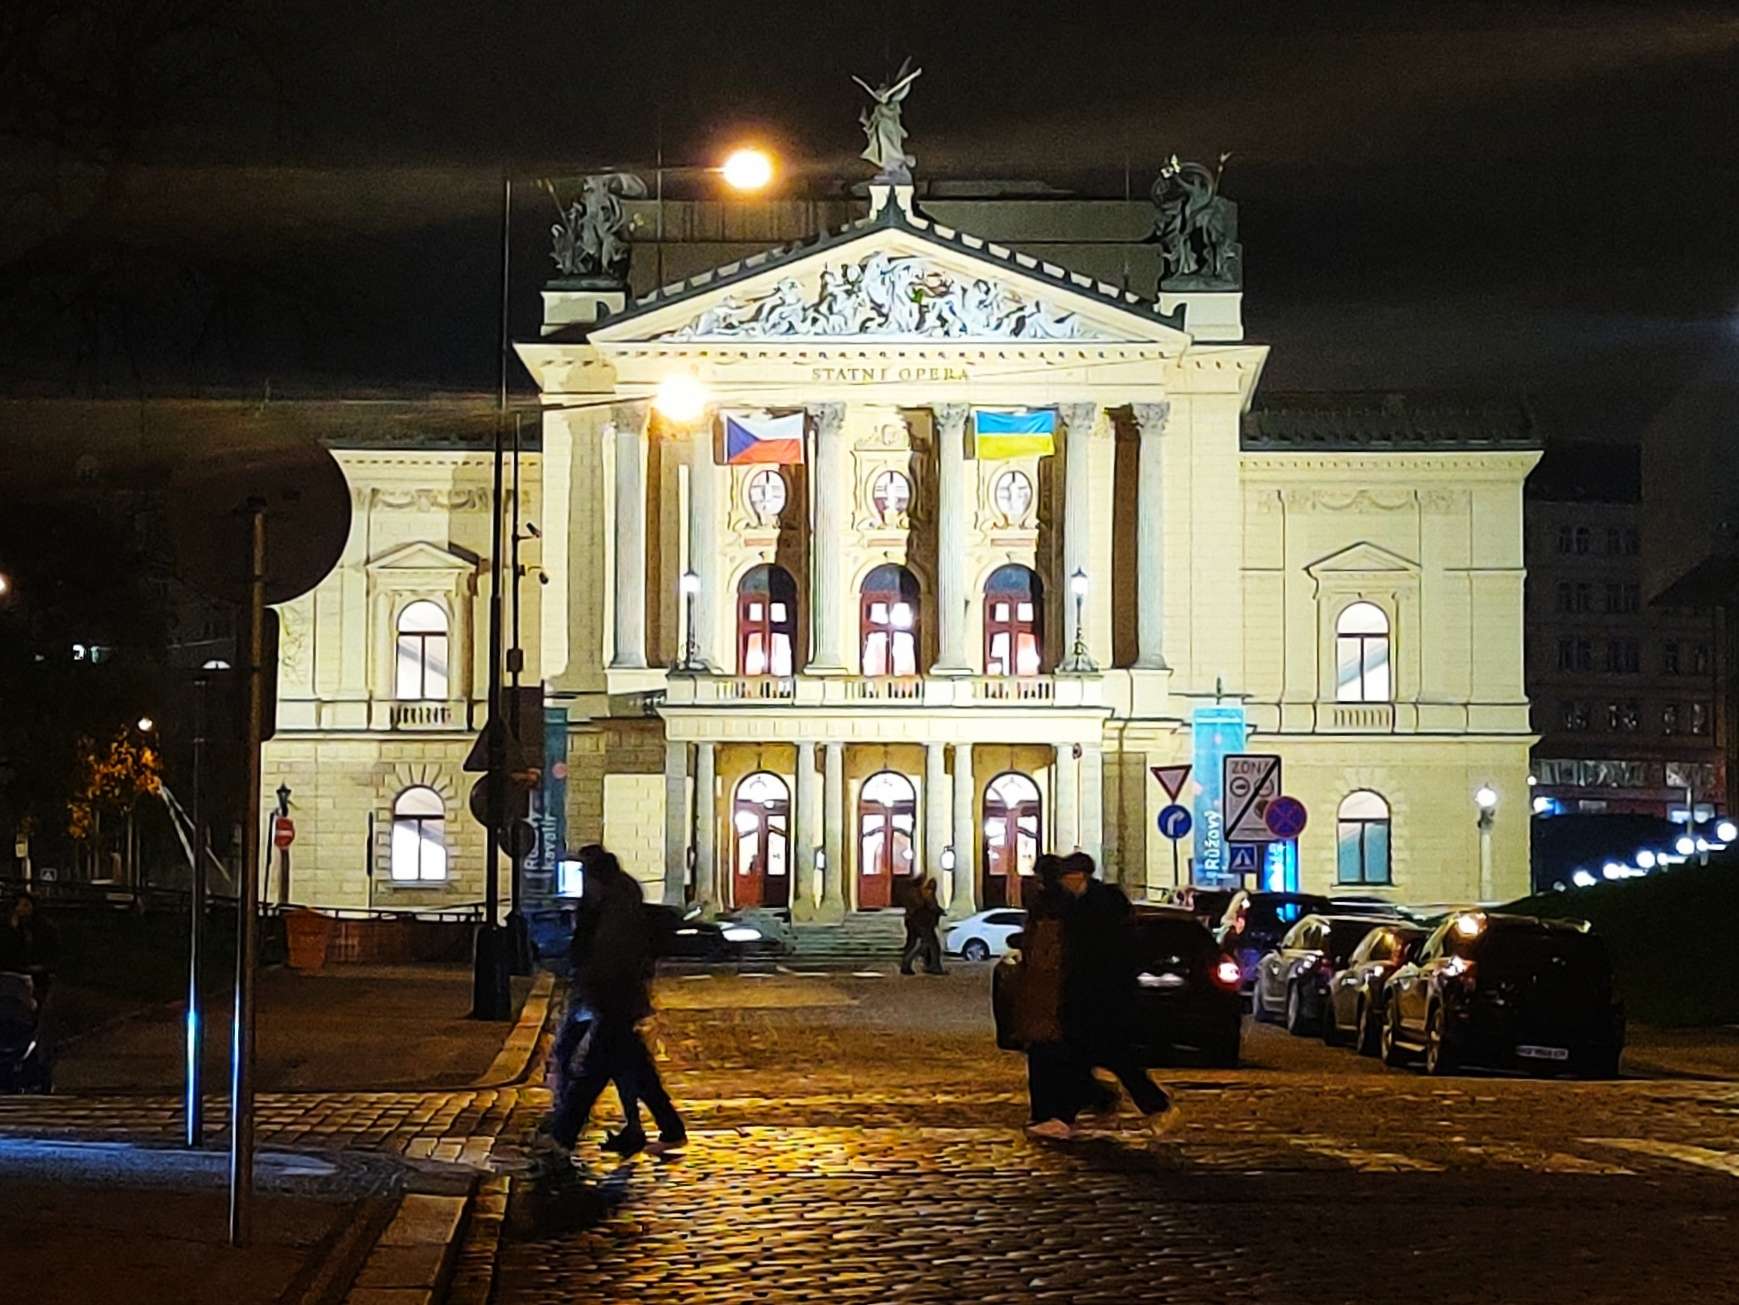 Prague's state opera house in the evening, lit up with lights. Czech and Ukrainian flags hanging on the outside.